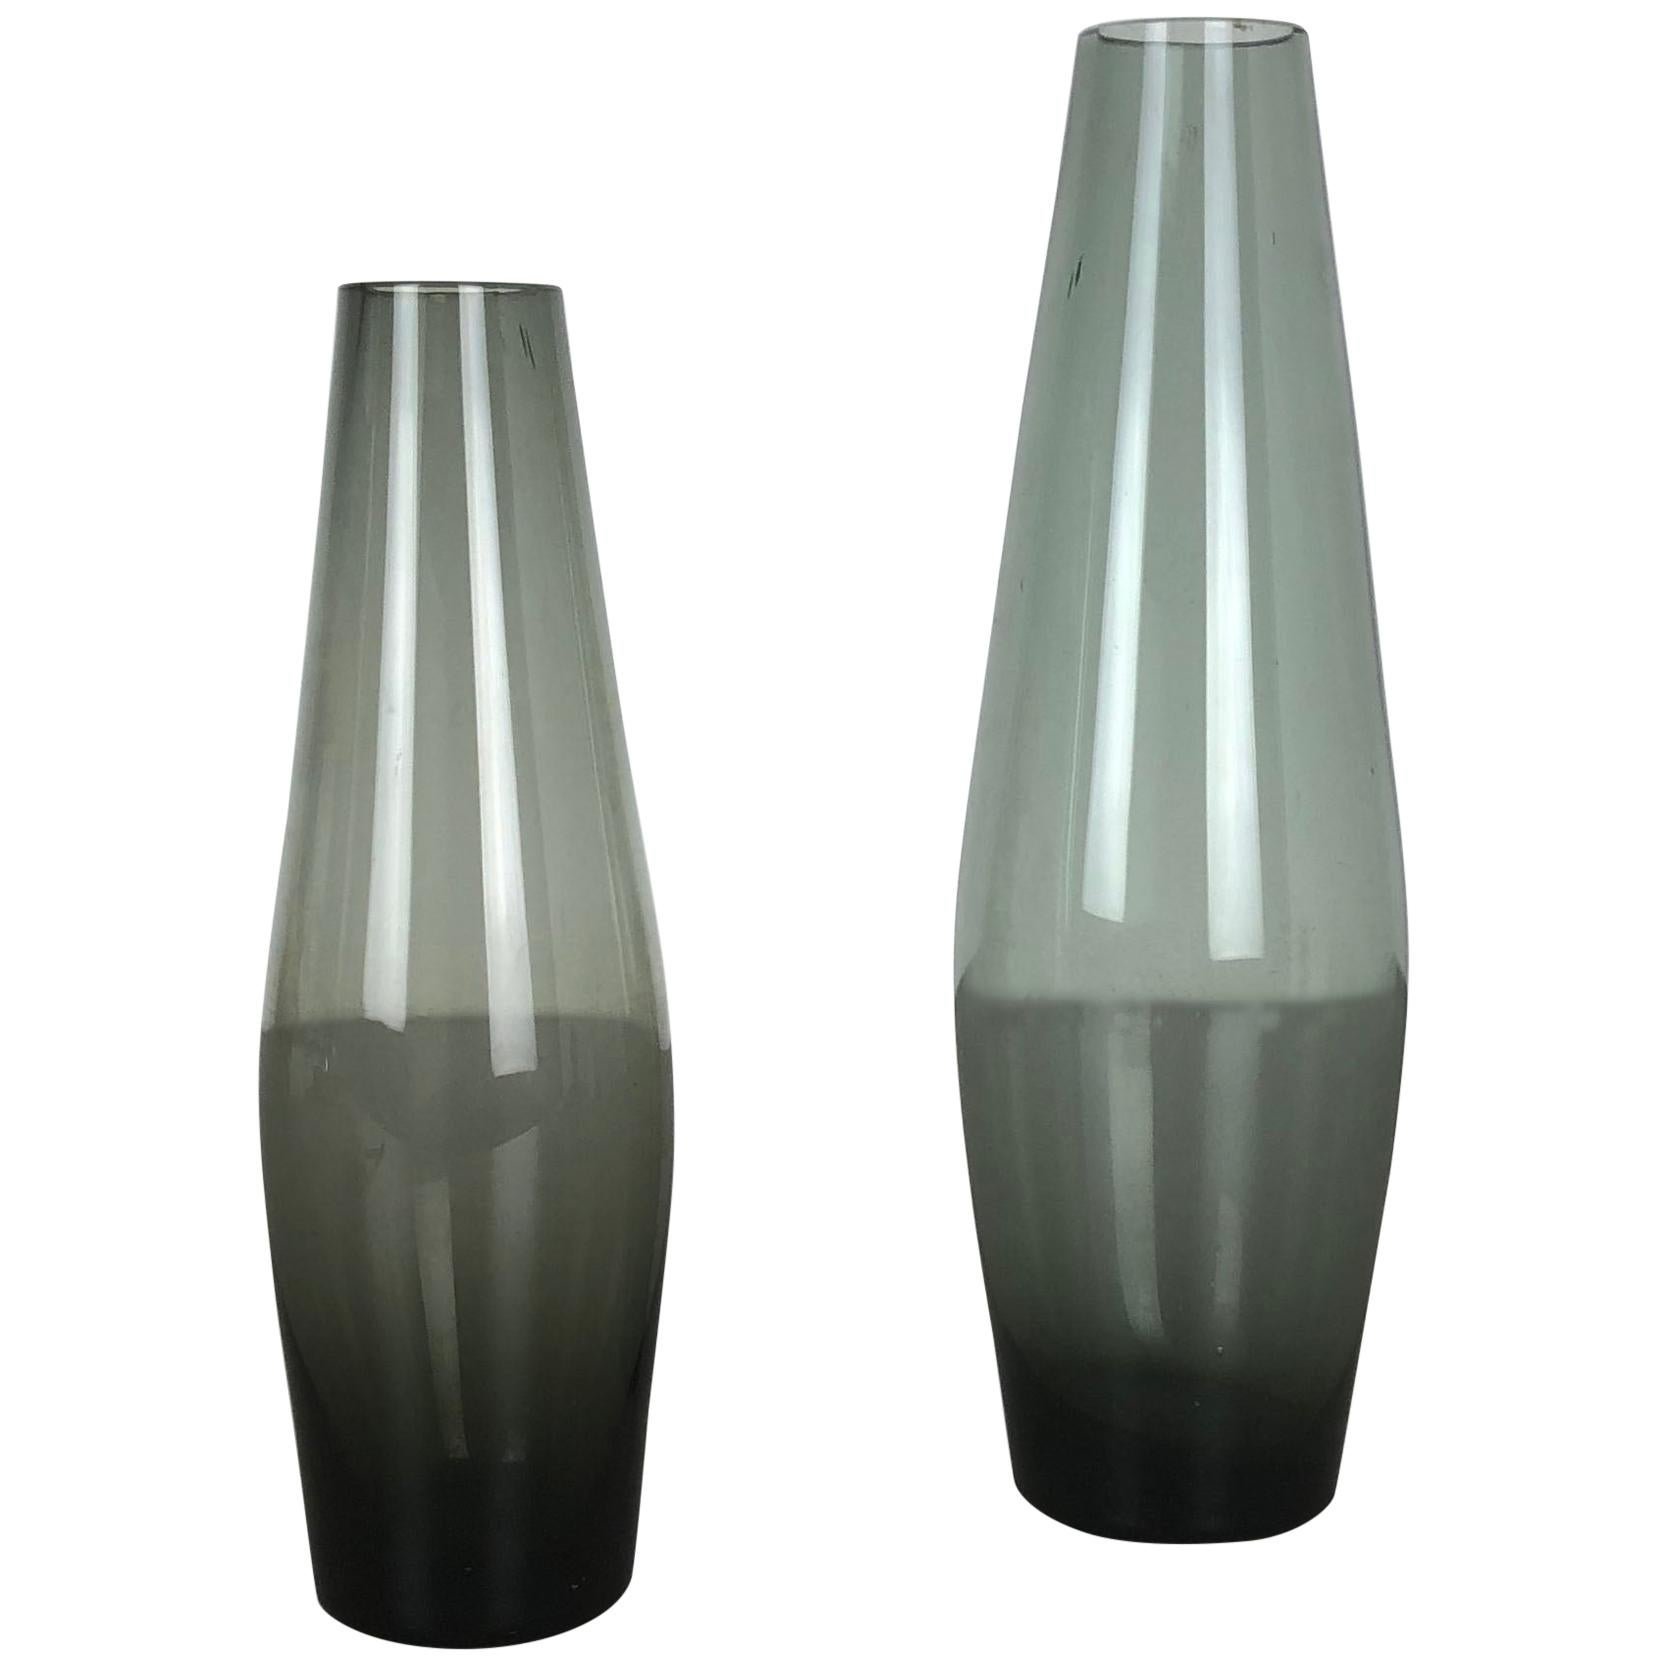 Vintage 1960s Set of 2 Turmaline Vases by Wilhelm Wagenfeld for WMF, Germany